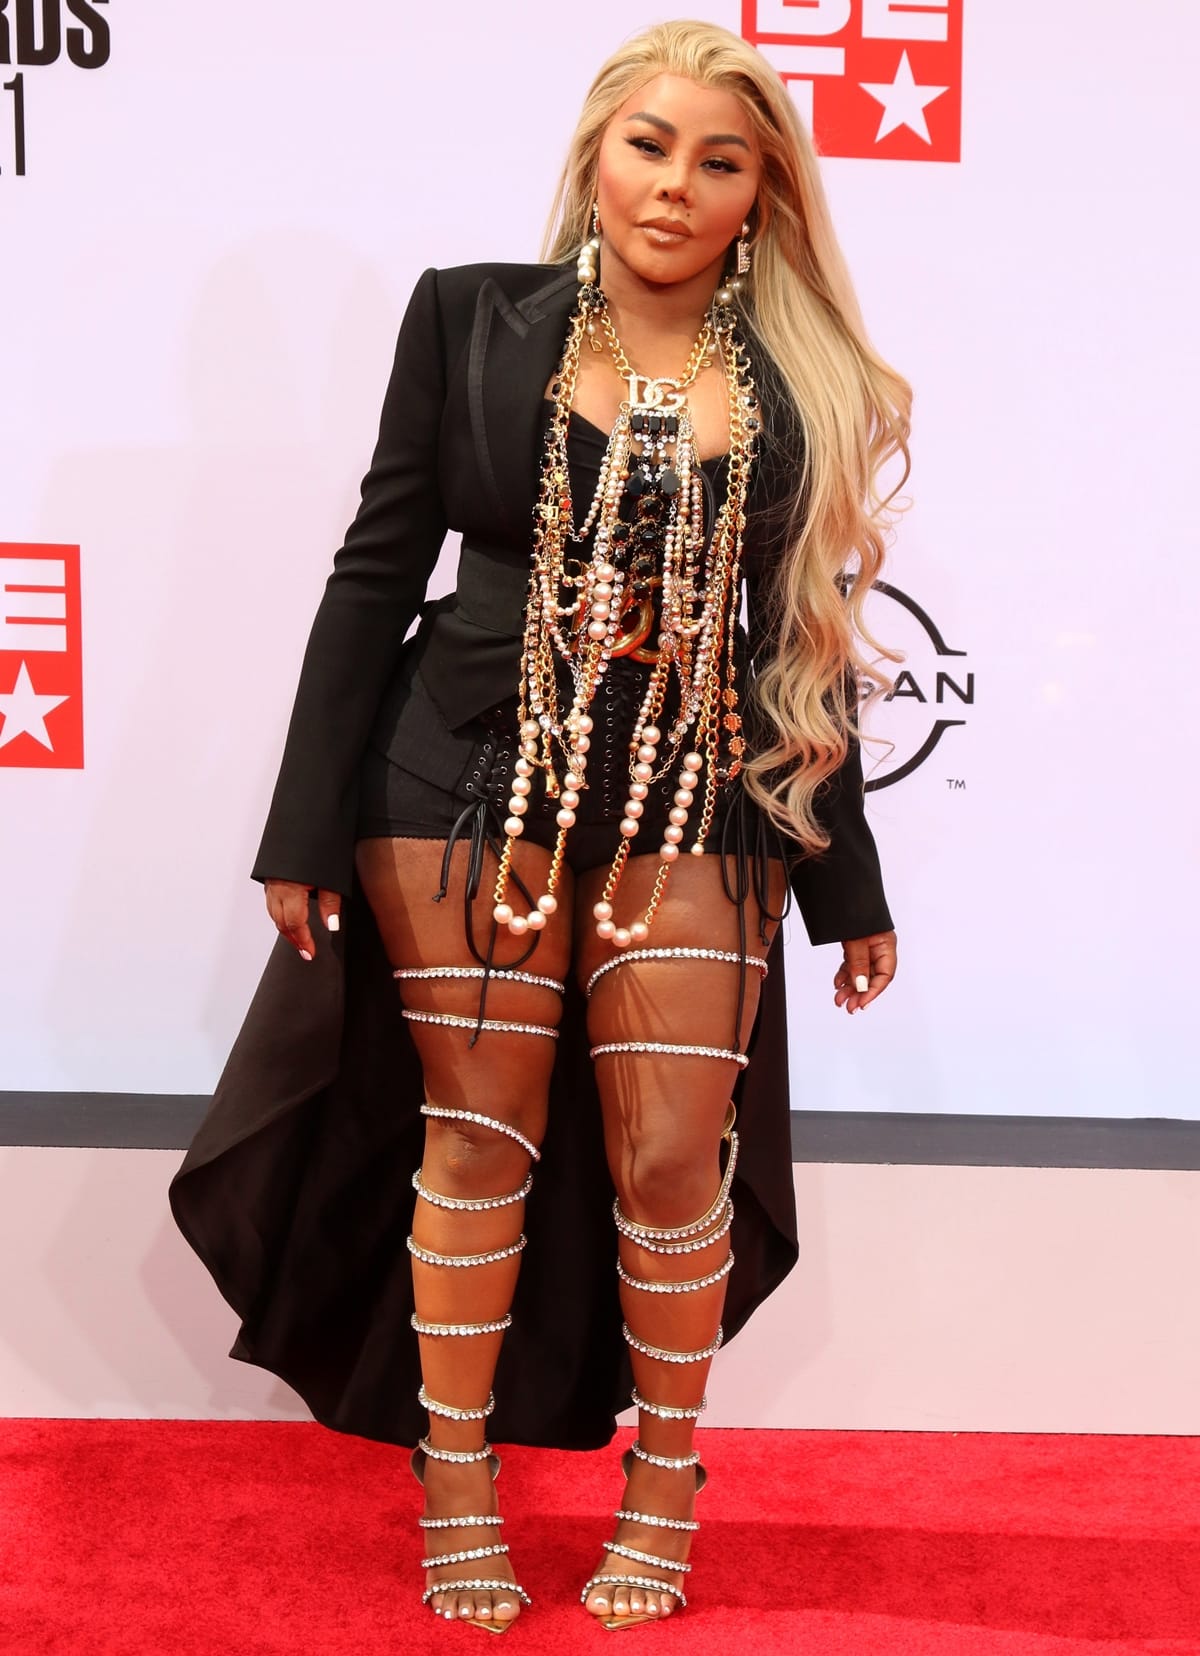 Lil’ Kim rocked black shorts with a tuxedo jacket and jewelry from Dolce and Gabbana at the BET Awards 2021